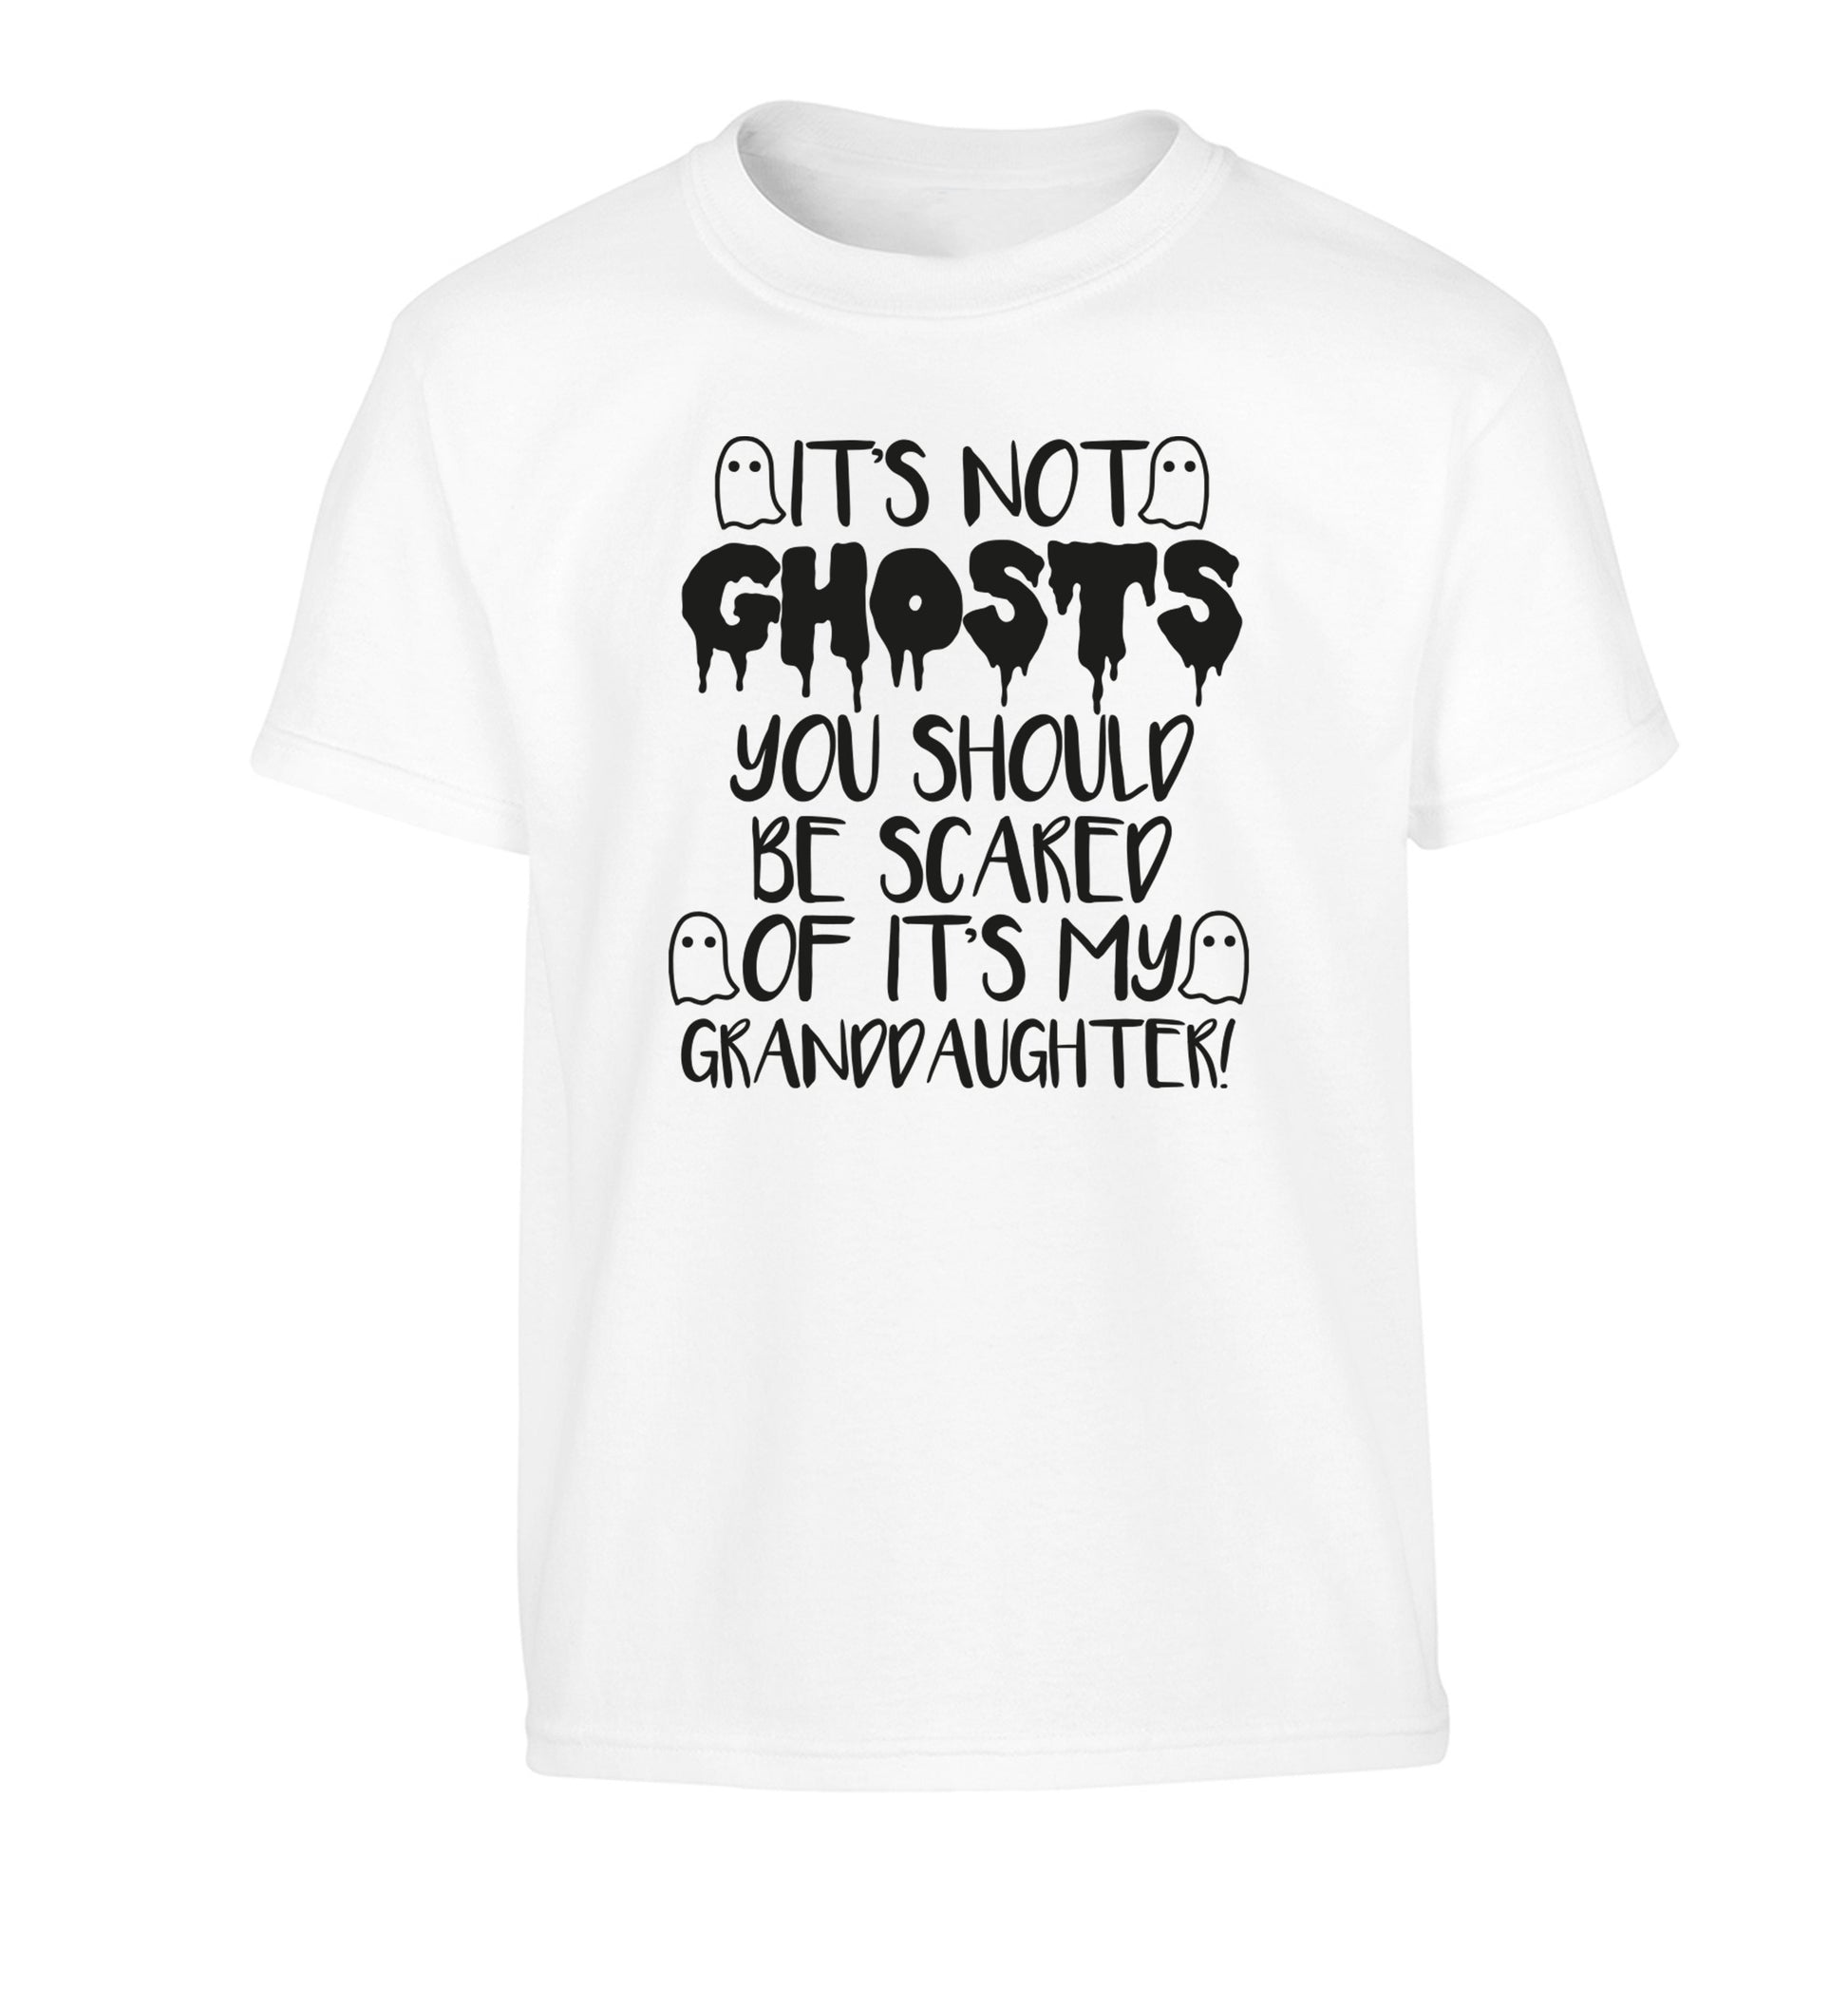 It's not ghosts you should be scared of it's my granddaughter! Children's white Tshirt 12-14 Years